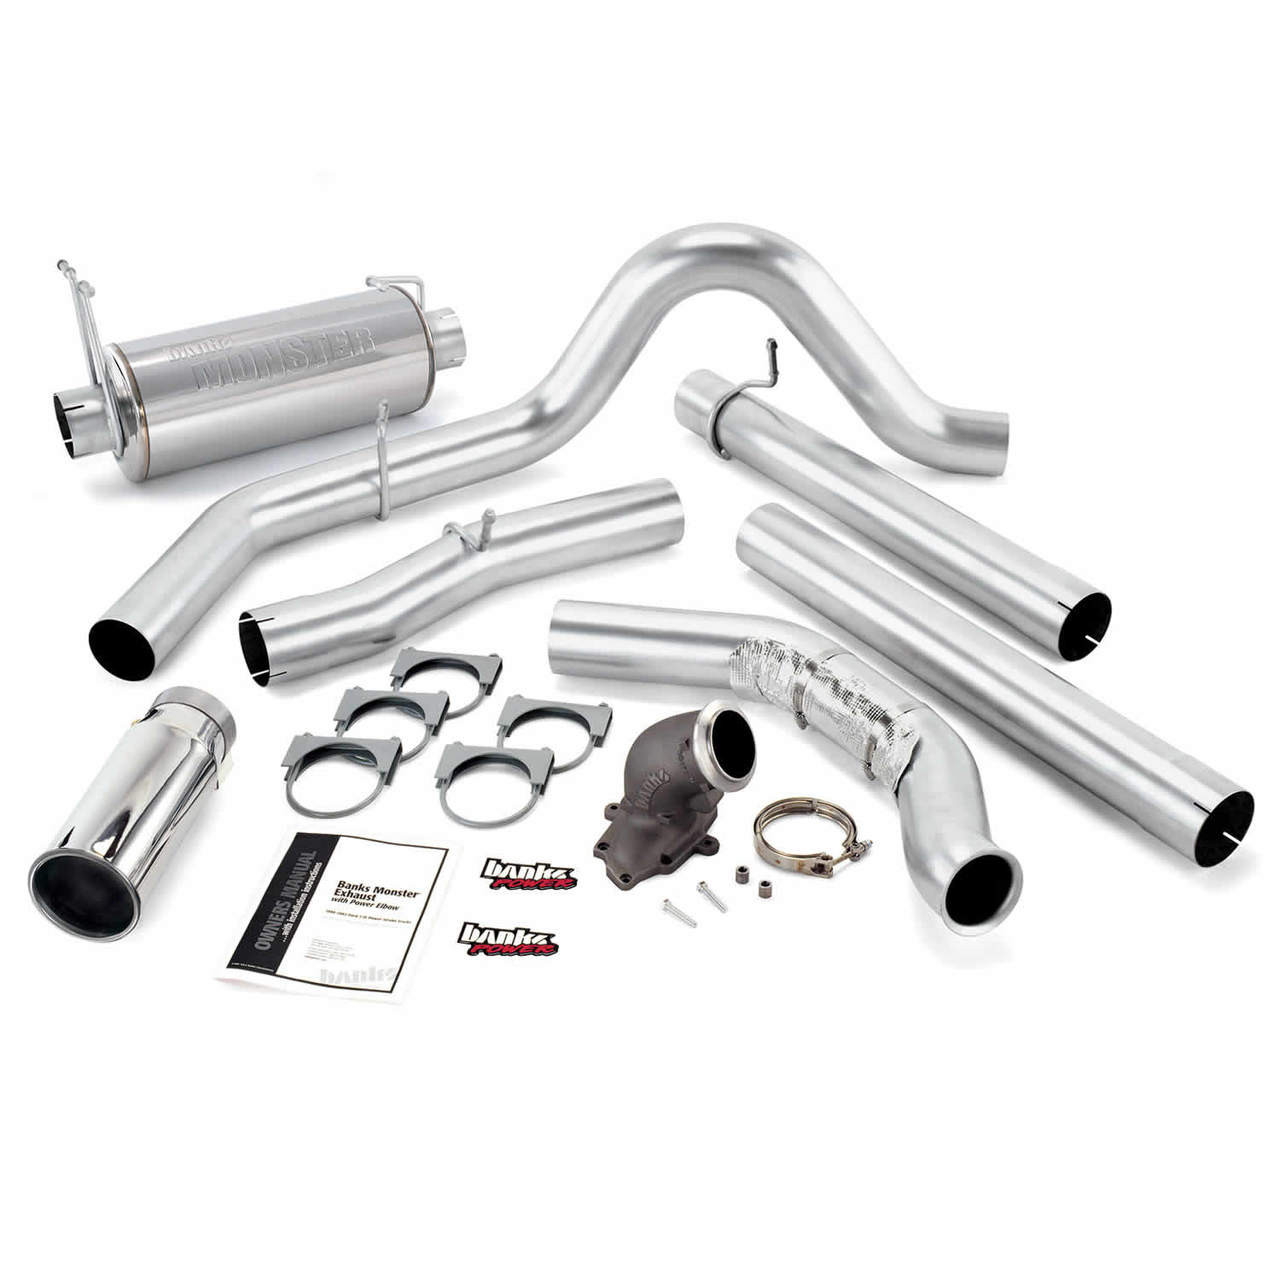 Banks Monster Exhaust W/Power Elbow, S/S-Chrome Tip - 1999-03 Ford 7.3L, No-Cat